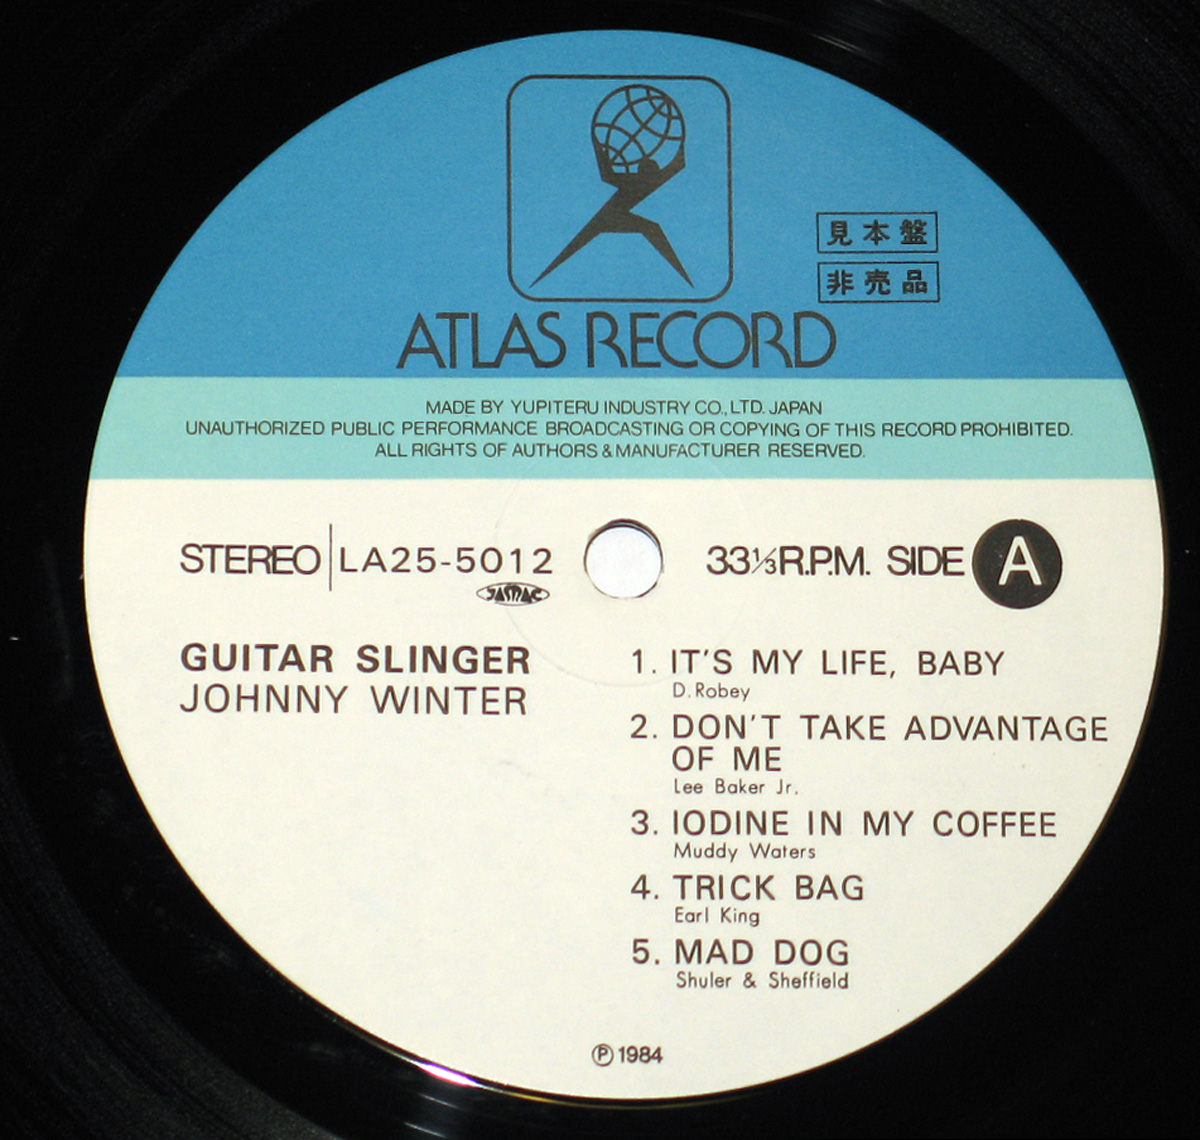 Close up of Side One record's label "JOHNNY WINTER - Guitar Slinger Japanese Release" Record Label Details: ATLAS Record Stereo LA25-5012